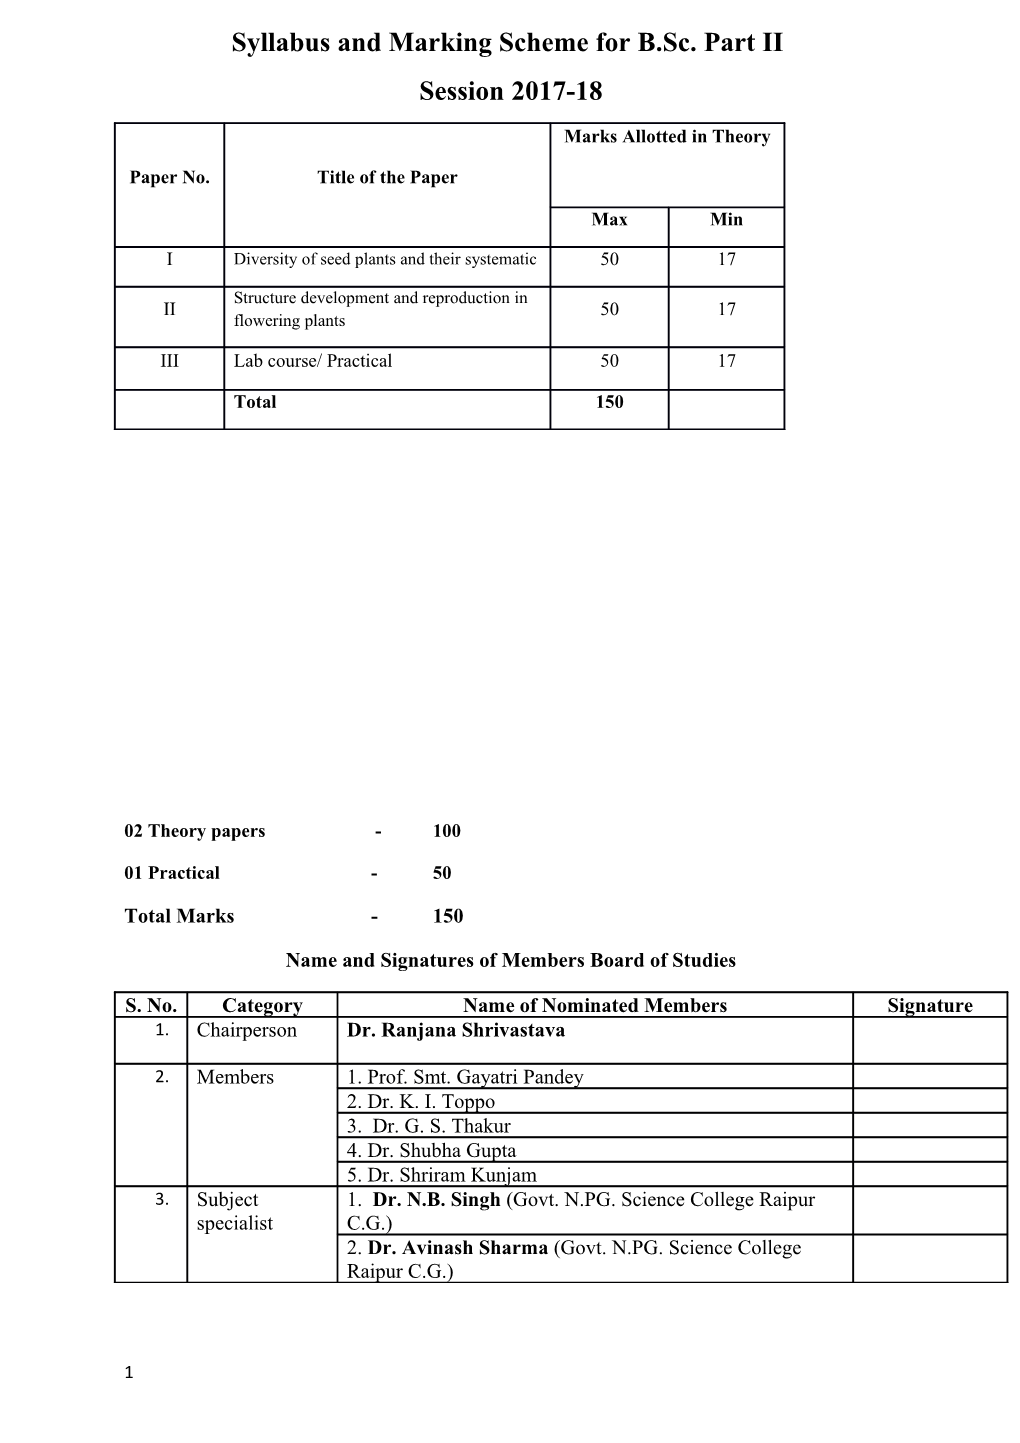 Syllabus and Marking Scheme for B.Sc. Part II